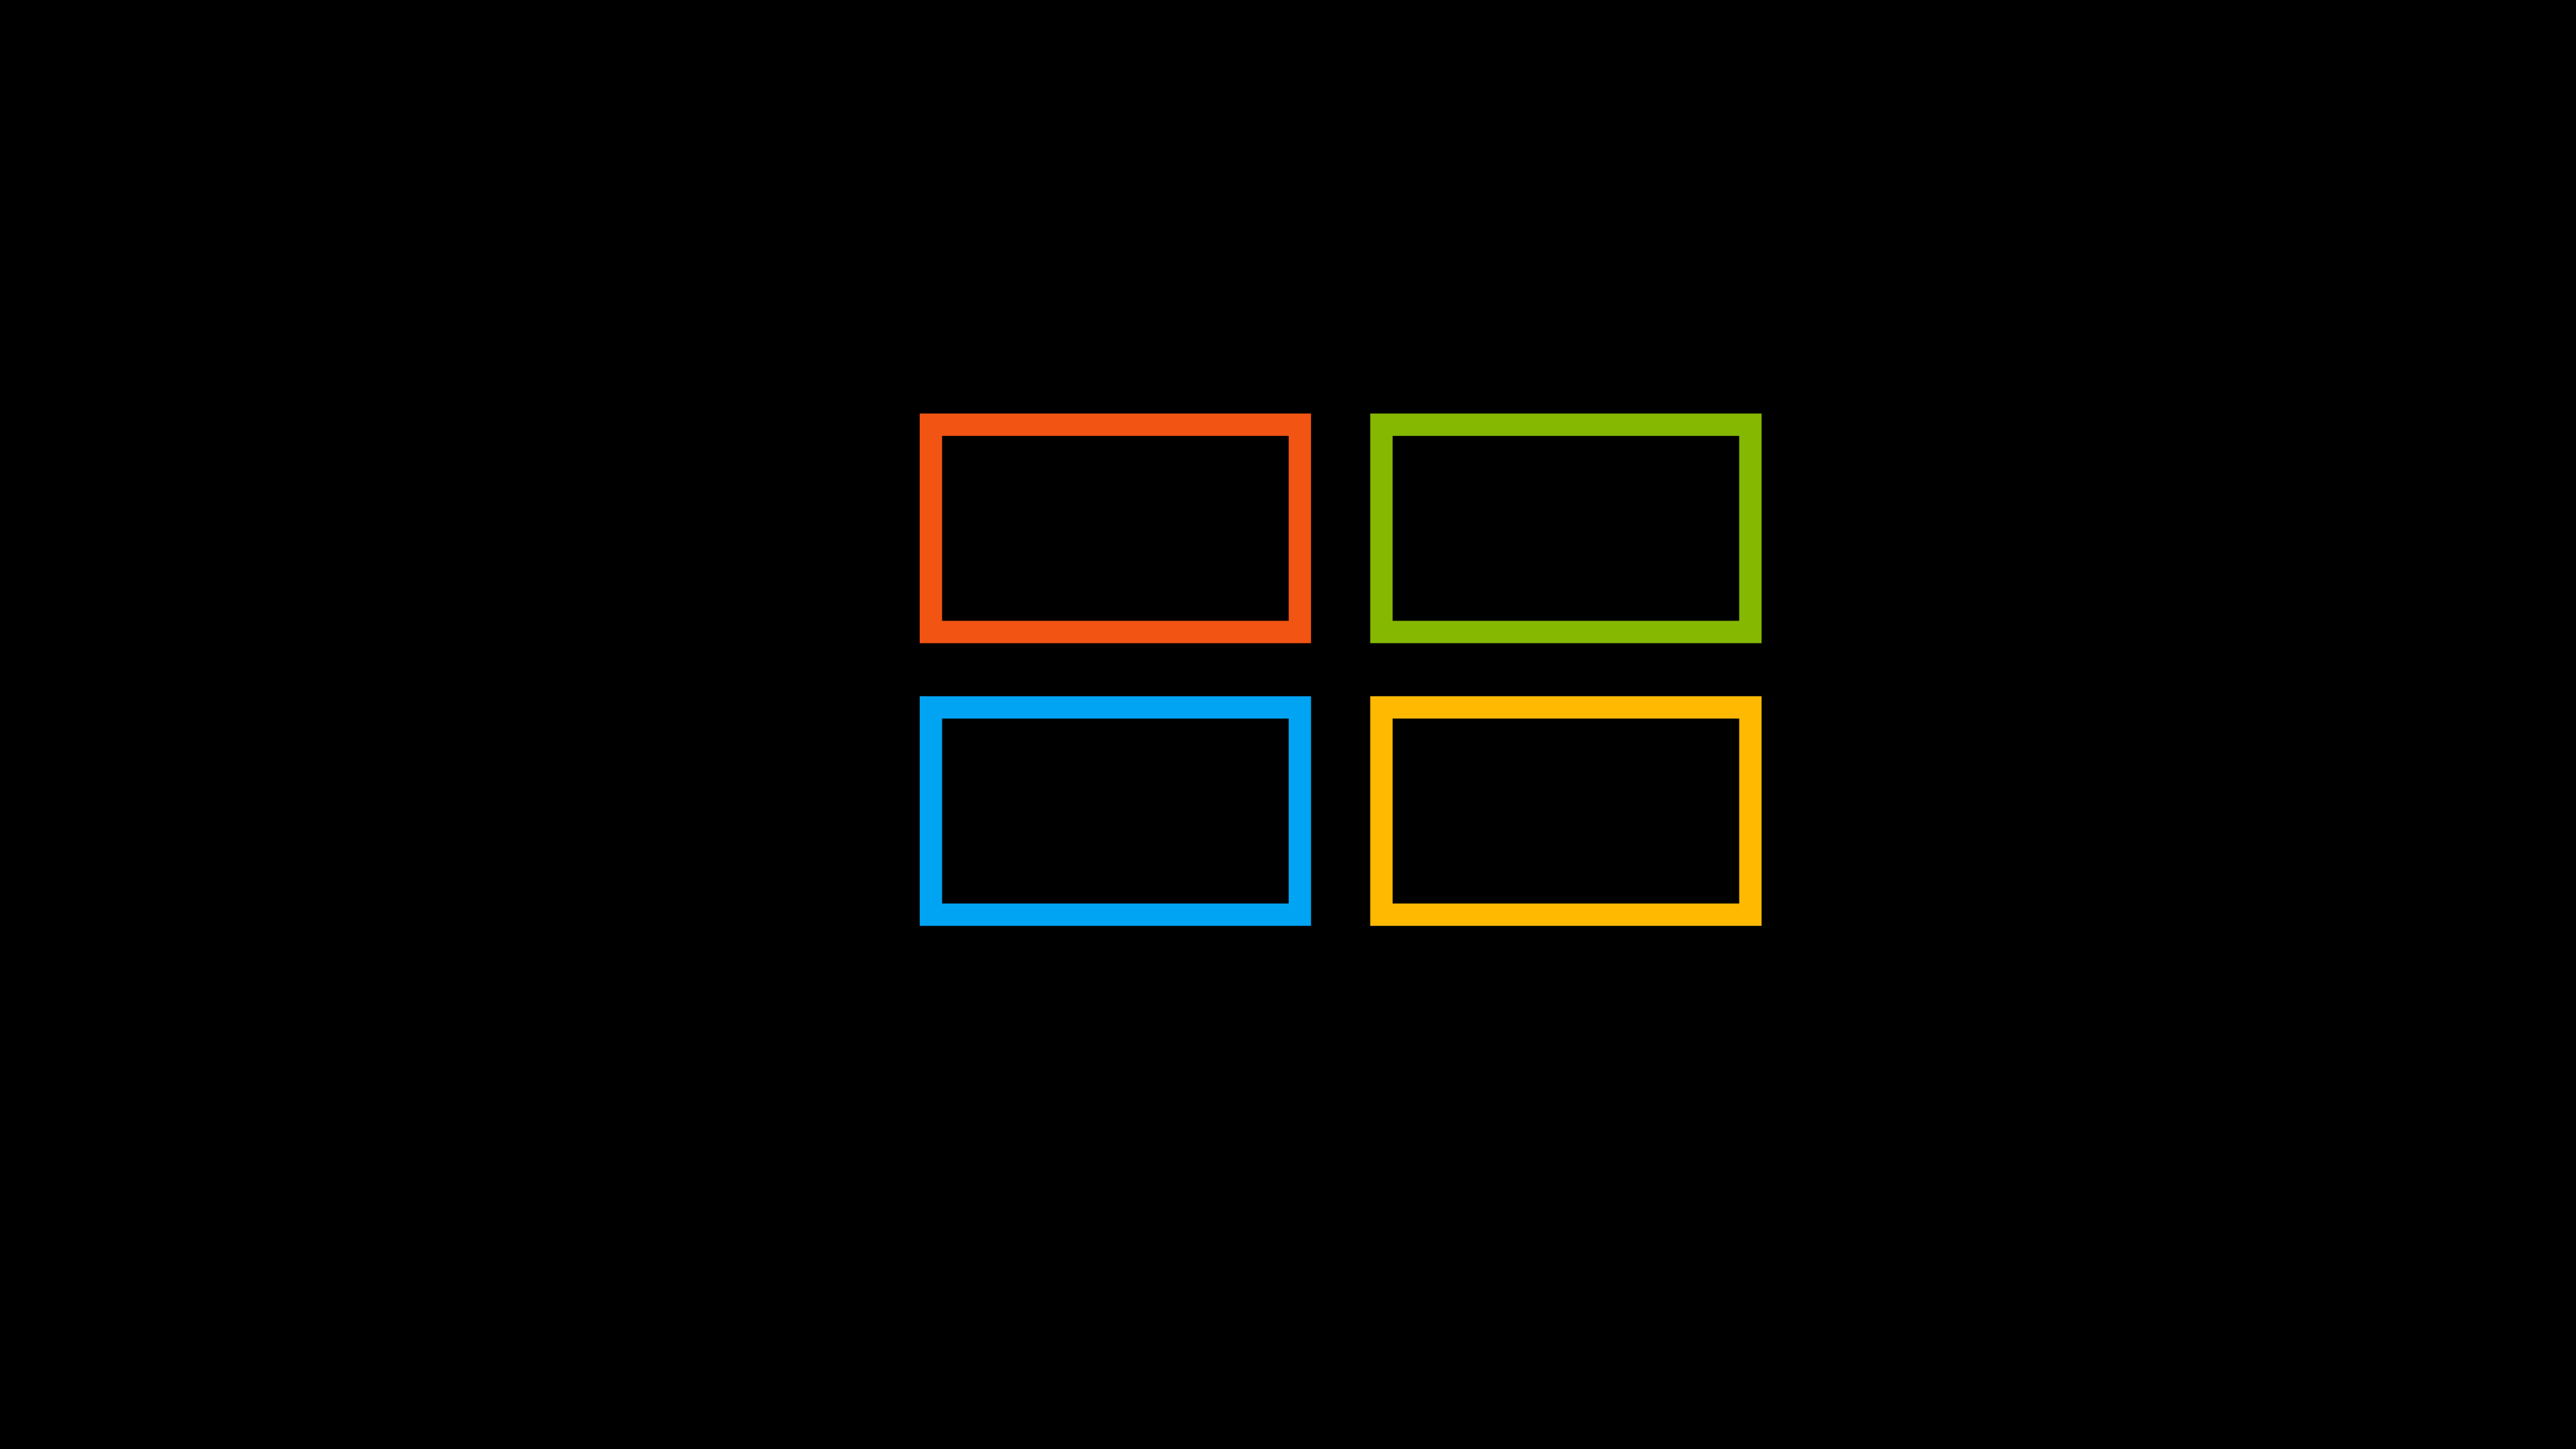 19x10 Microsoft Windows Logo Square 1080p Resolution Hd 4k Wallpapers Images Backgrounds Photos And Pictures